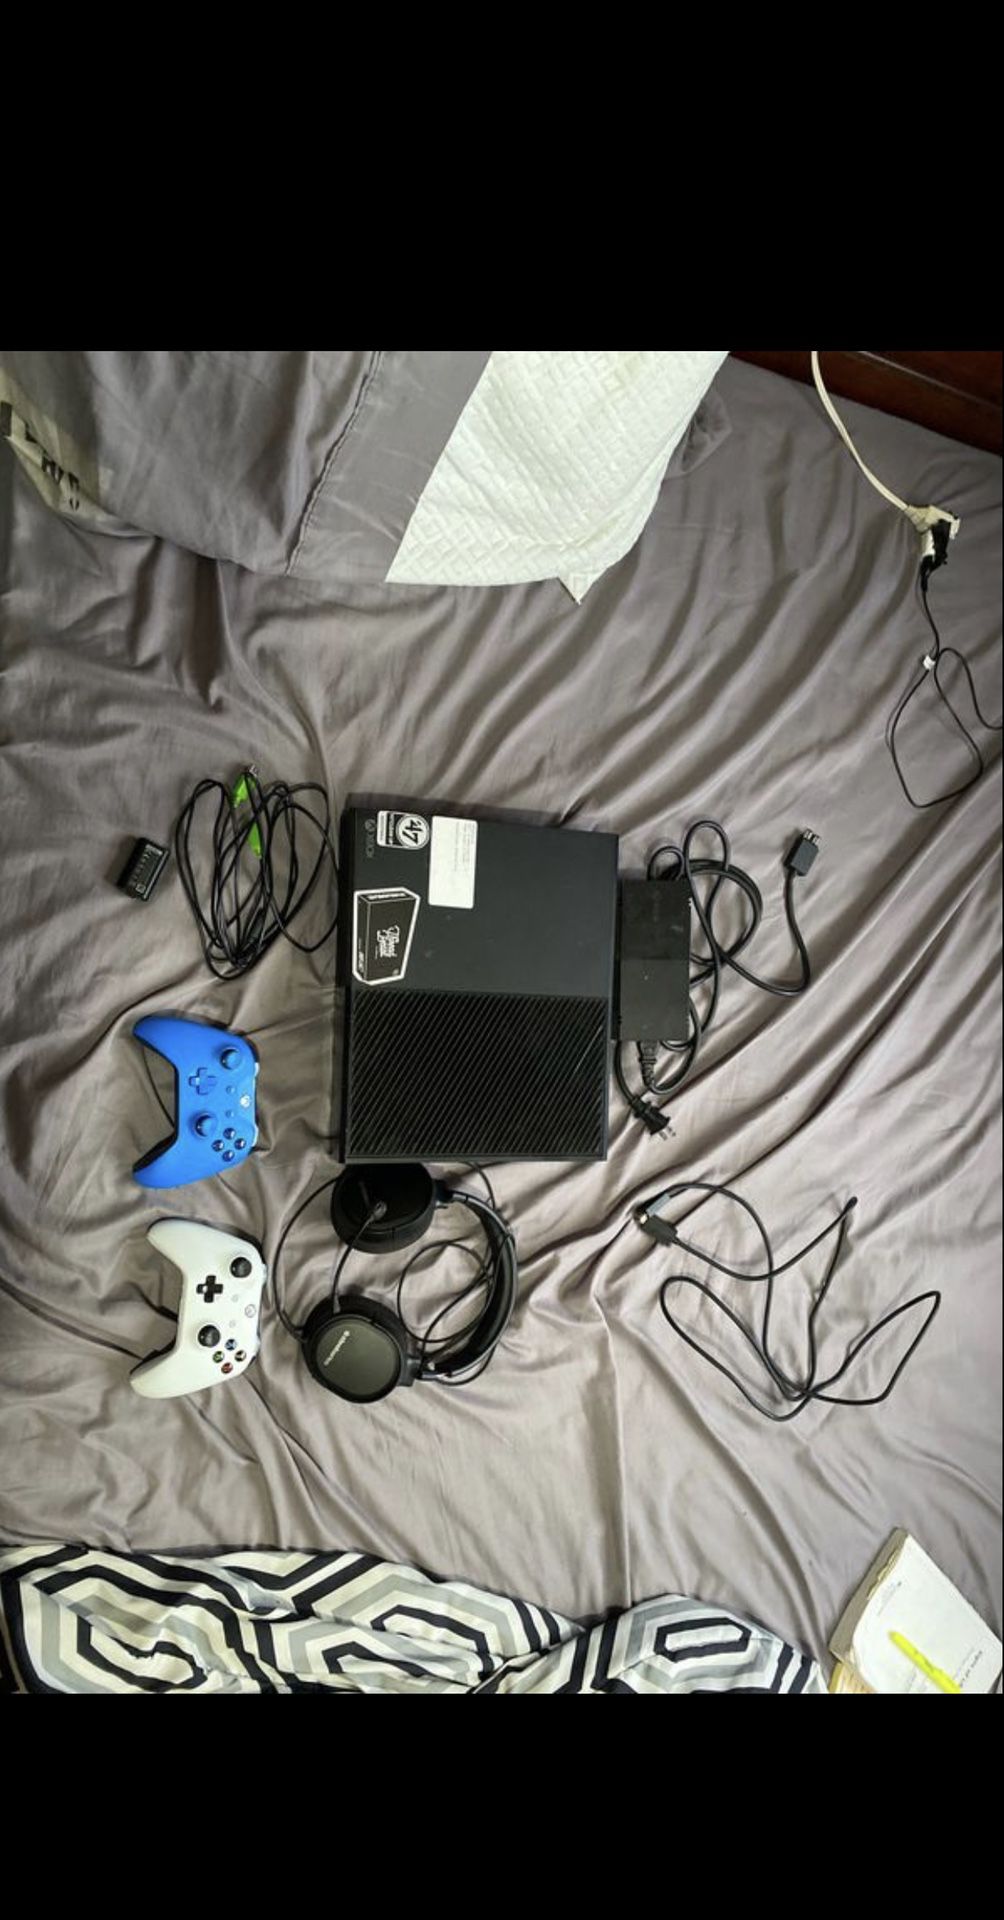 Xbox, two controllers, steel series headset, charging cord and charging pack